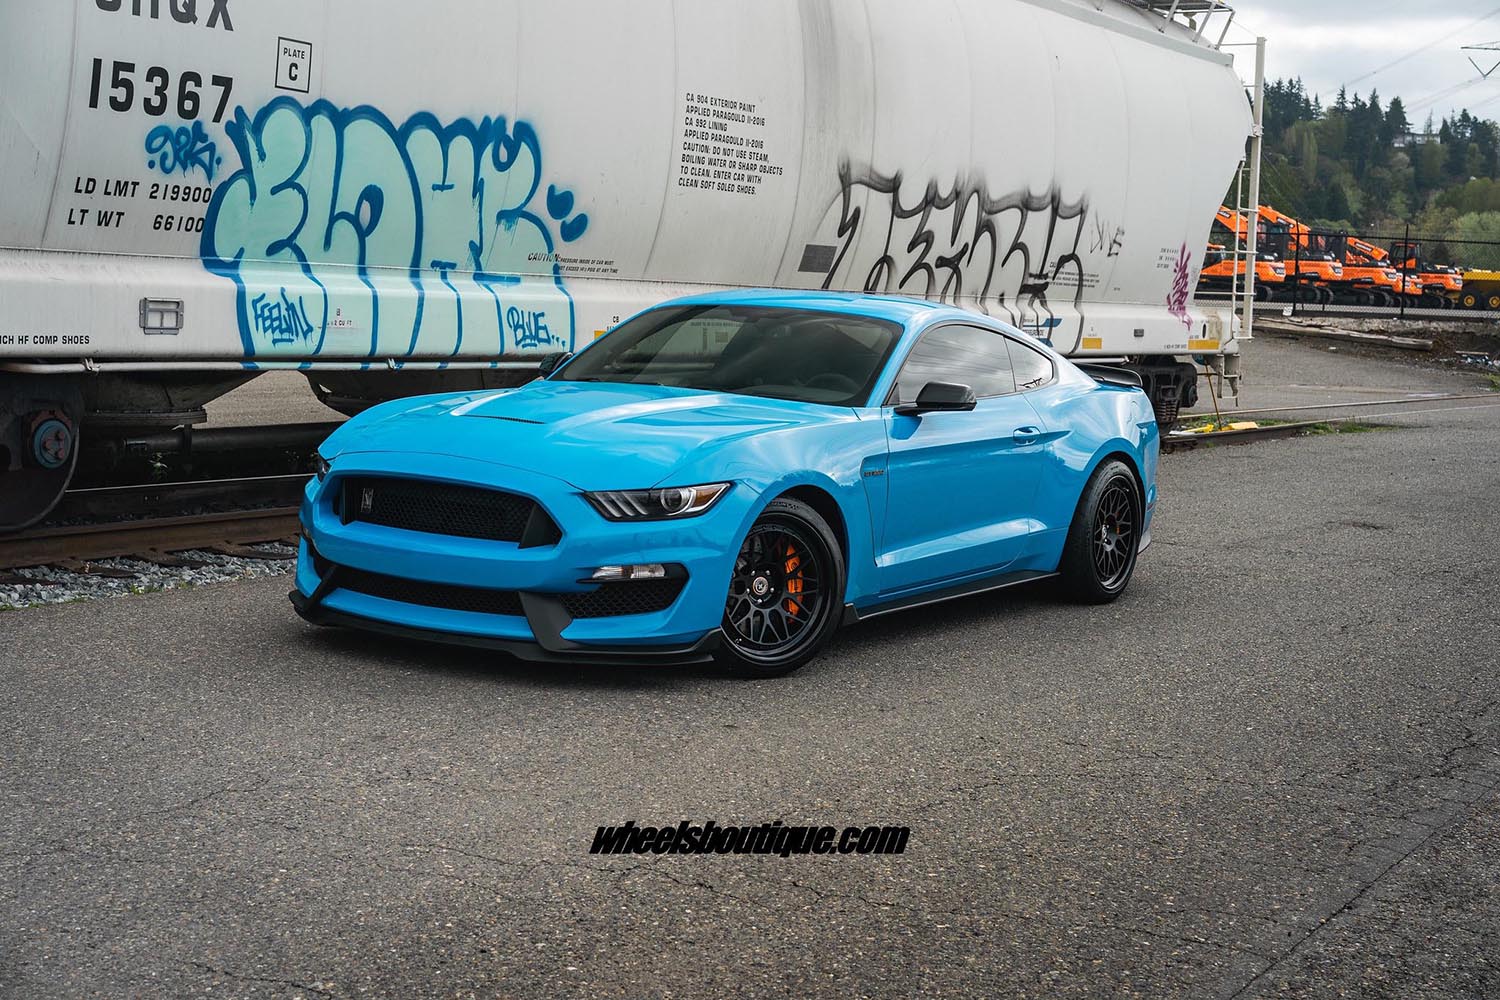 S650 Mustang Authorized HRE Wheels Dealer: Flow Form and Forged Series Wheels For Mustang S650 33987410938_b3b774014c_k